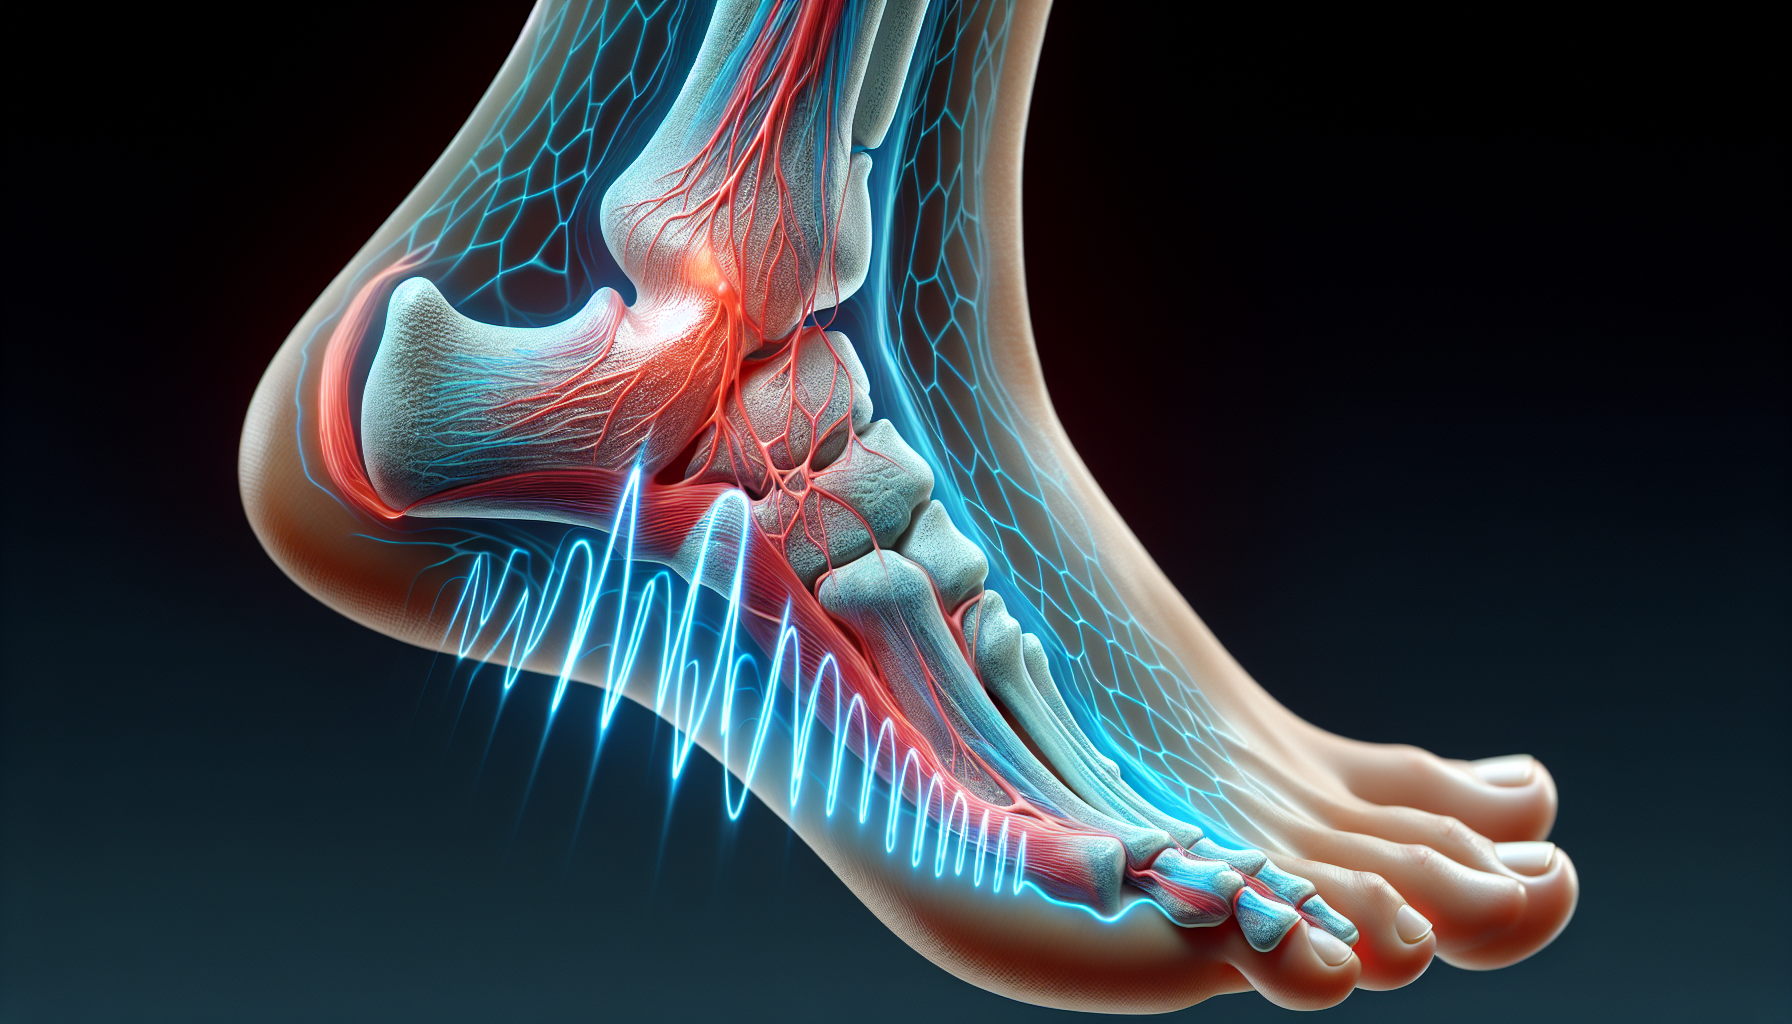 Illustration of a foot with plantar fasciitis